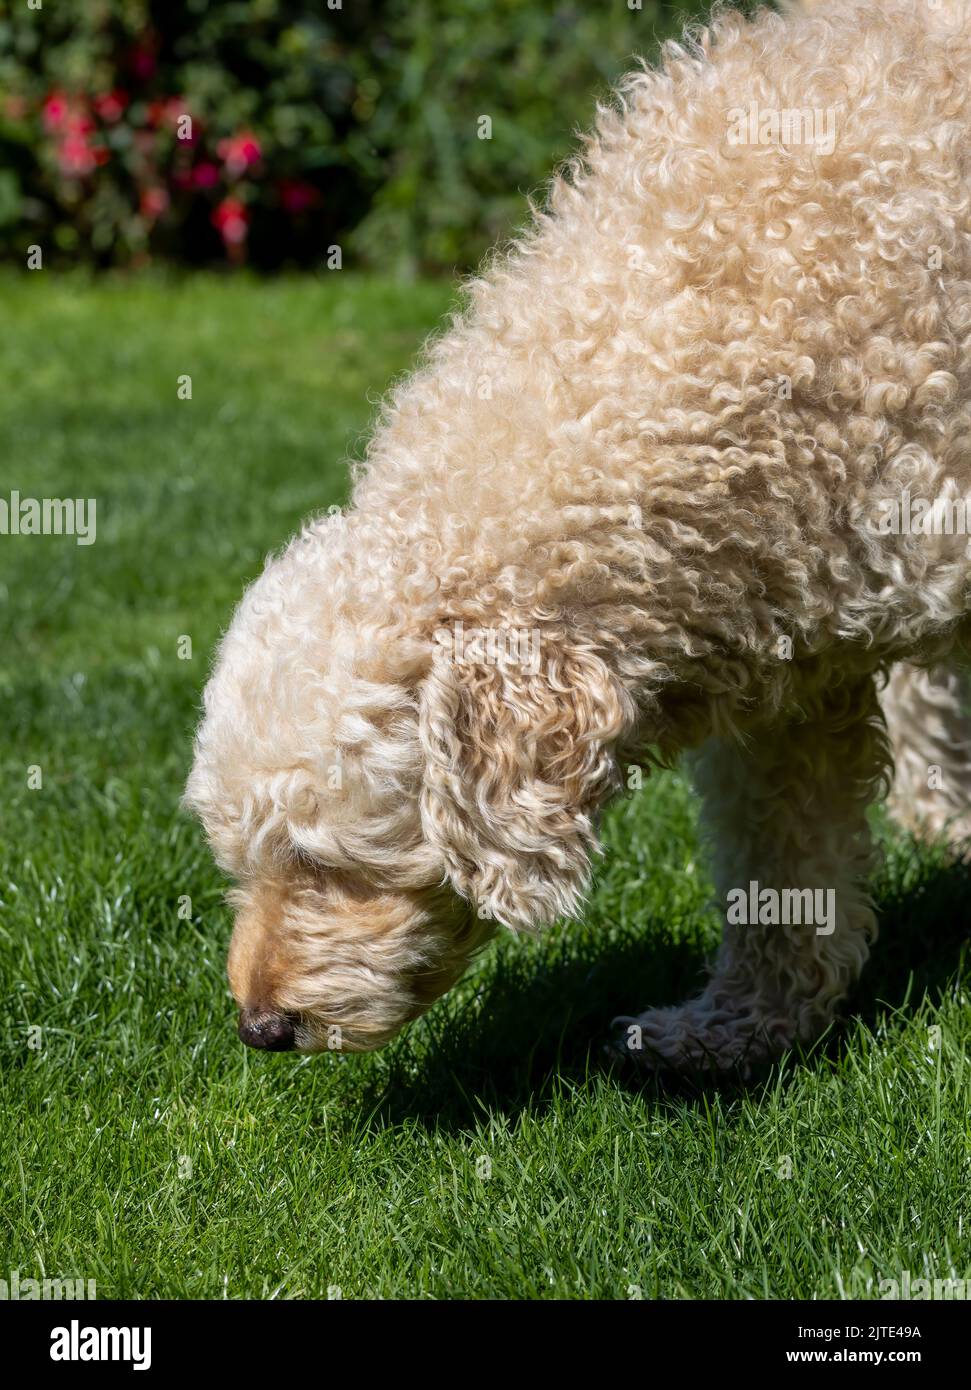 A close up of beautiful, curly haired beige coloured Labradoodle dog, sniffing grass Stock Photo